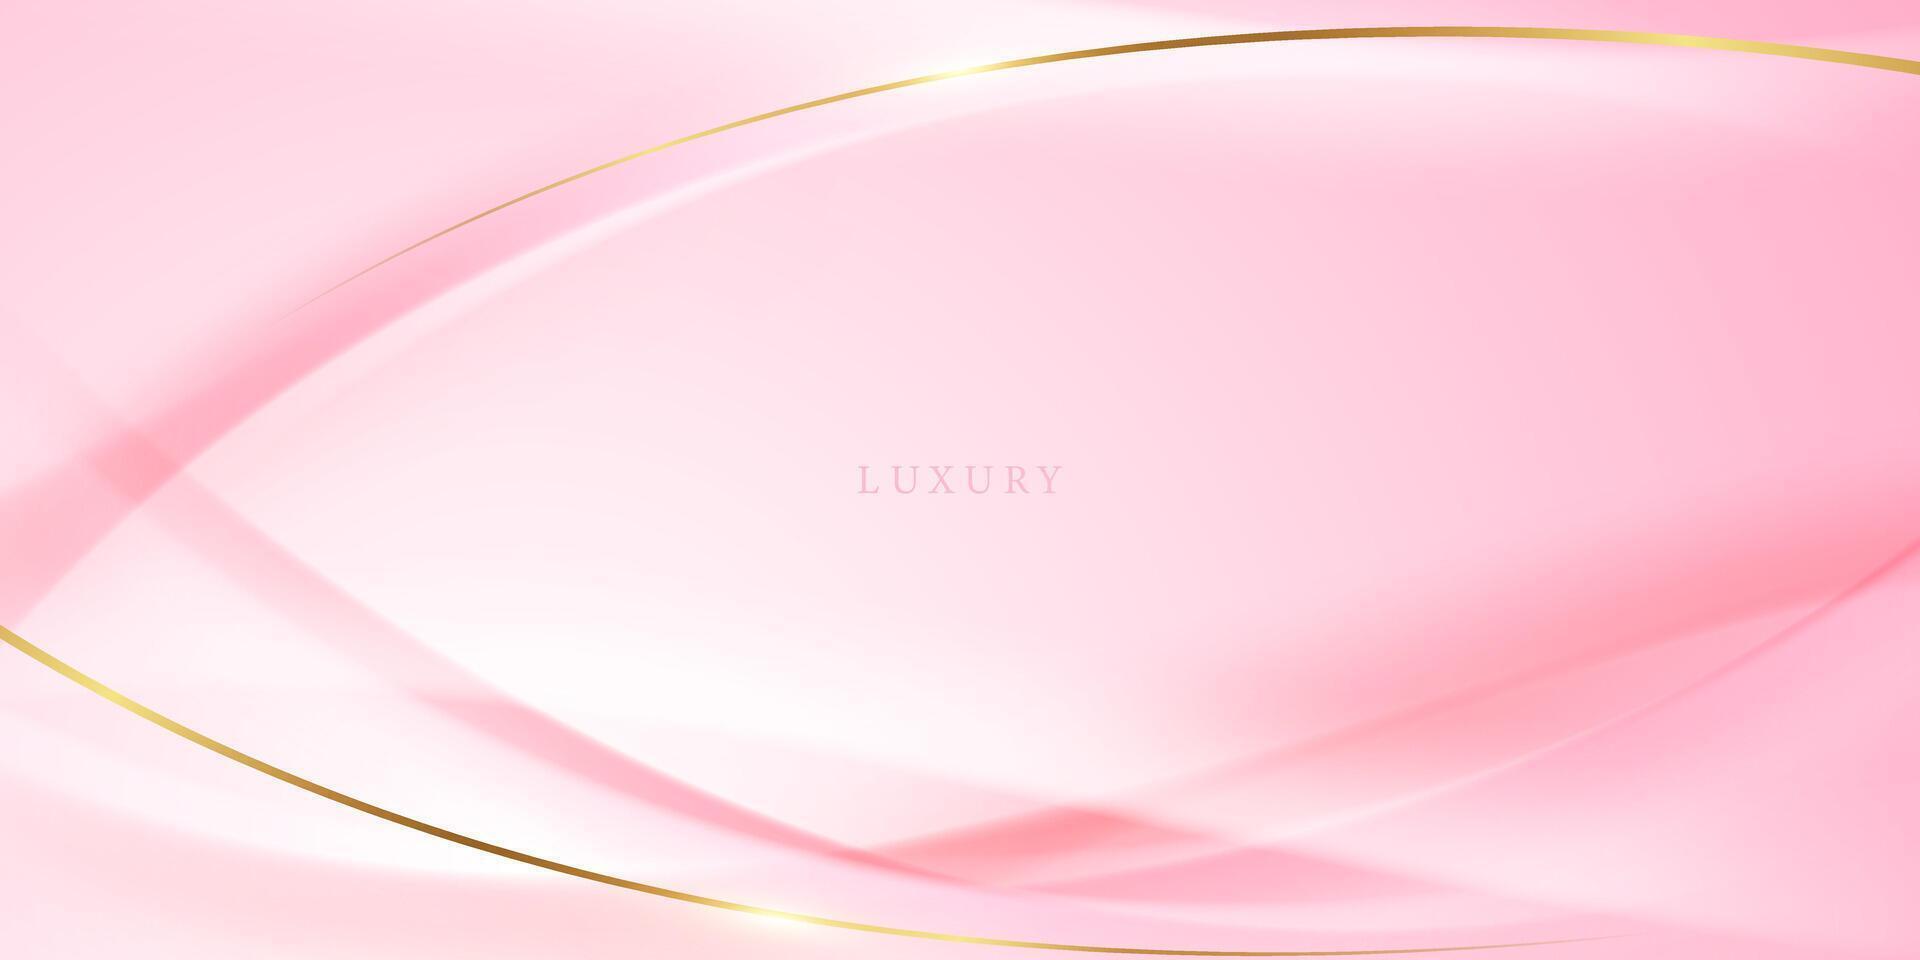 pink abstract background with luxury golden elements vector illustration